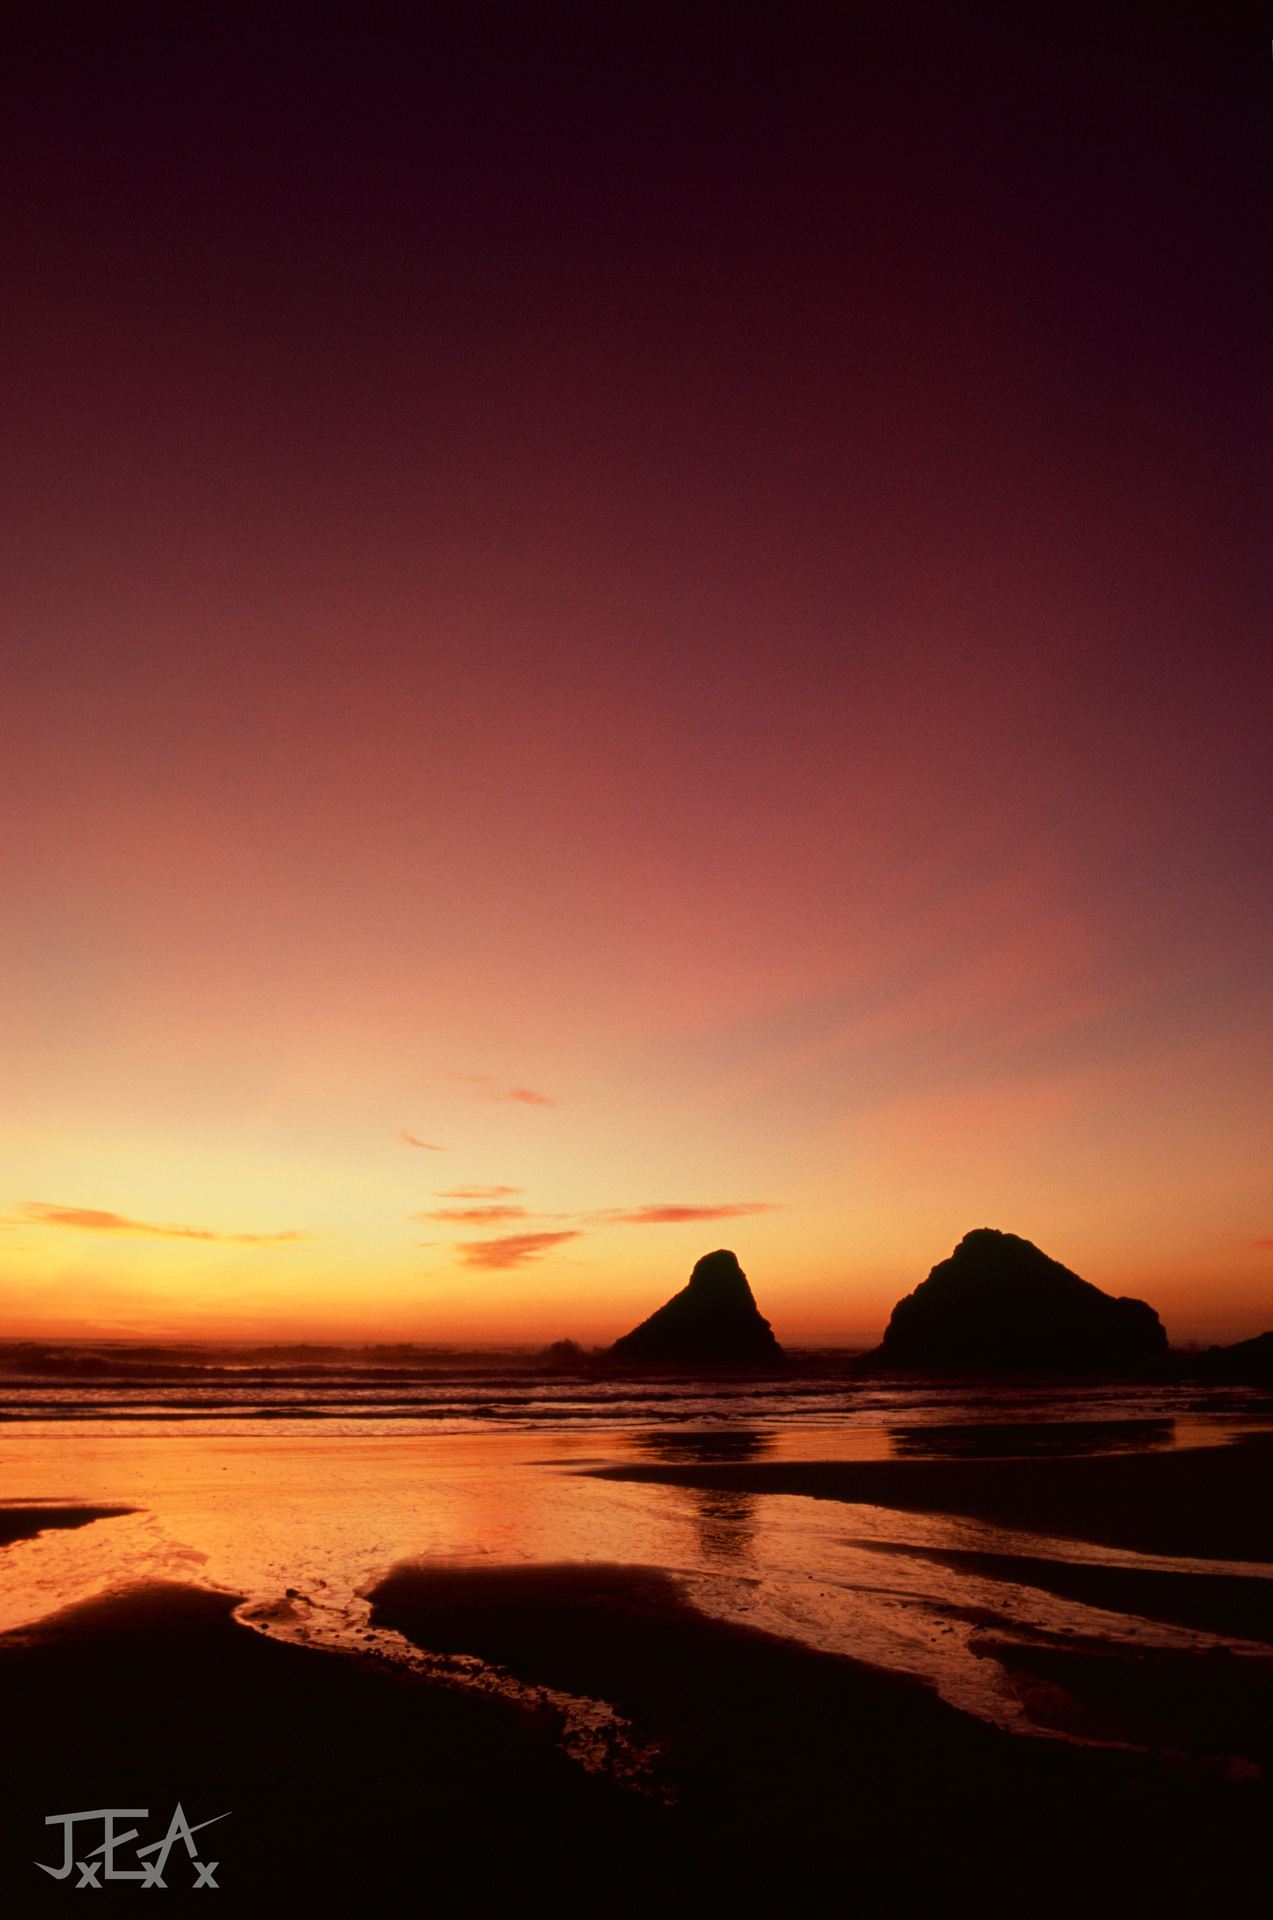 A fiery sunset at Cape Cove at the Heceta Head state viewpoint.